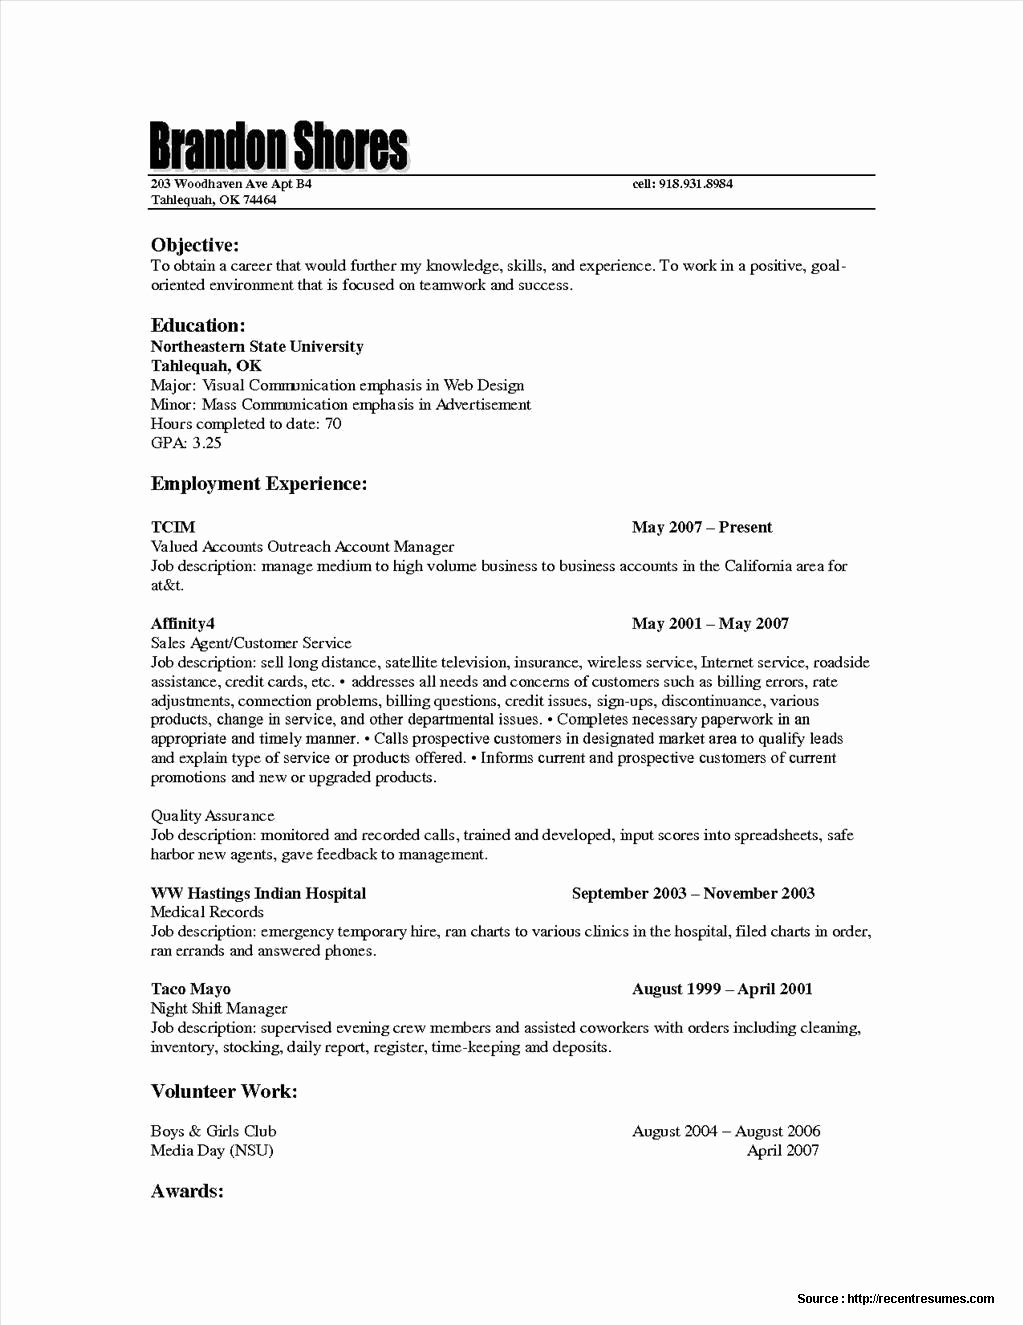 Resume for Life Insurance Agent Resume Resume Examples